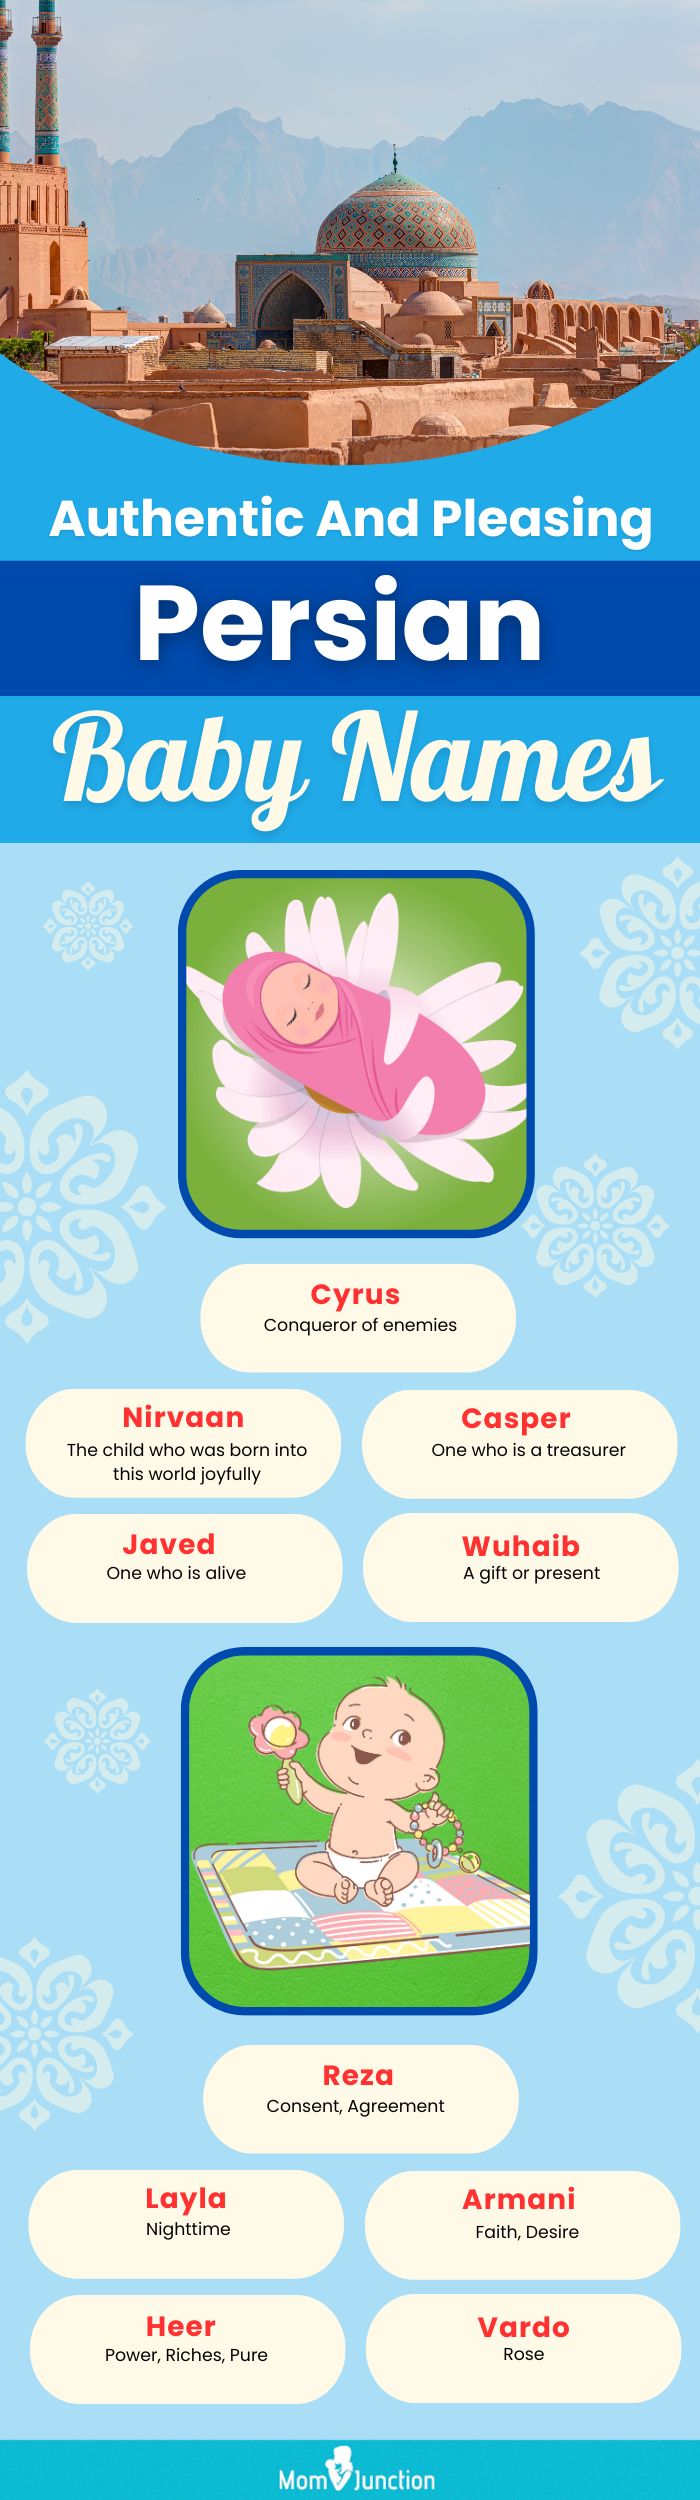 authentic and pleasing persian baby names (infographic)